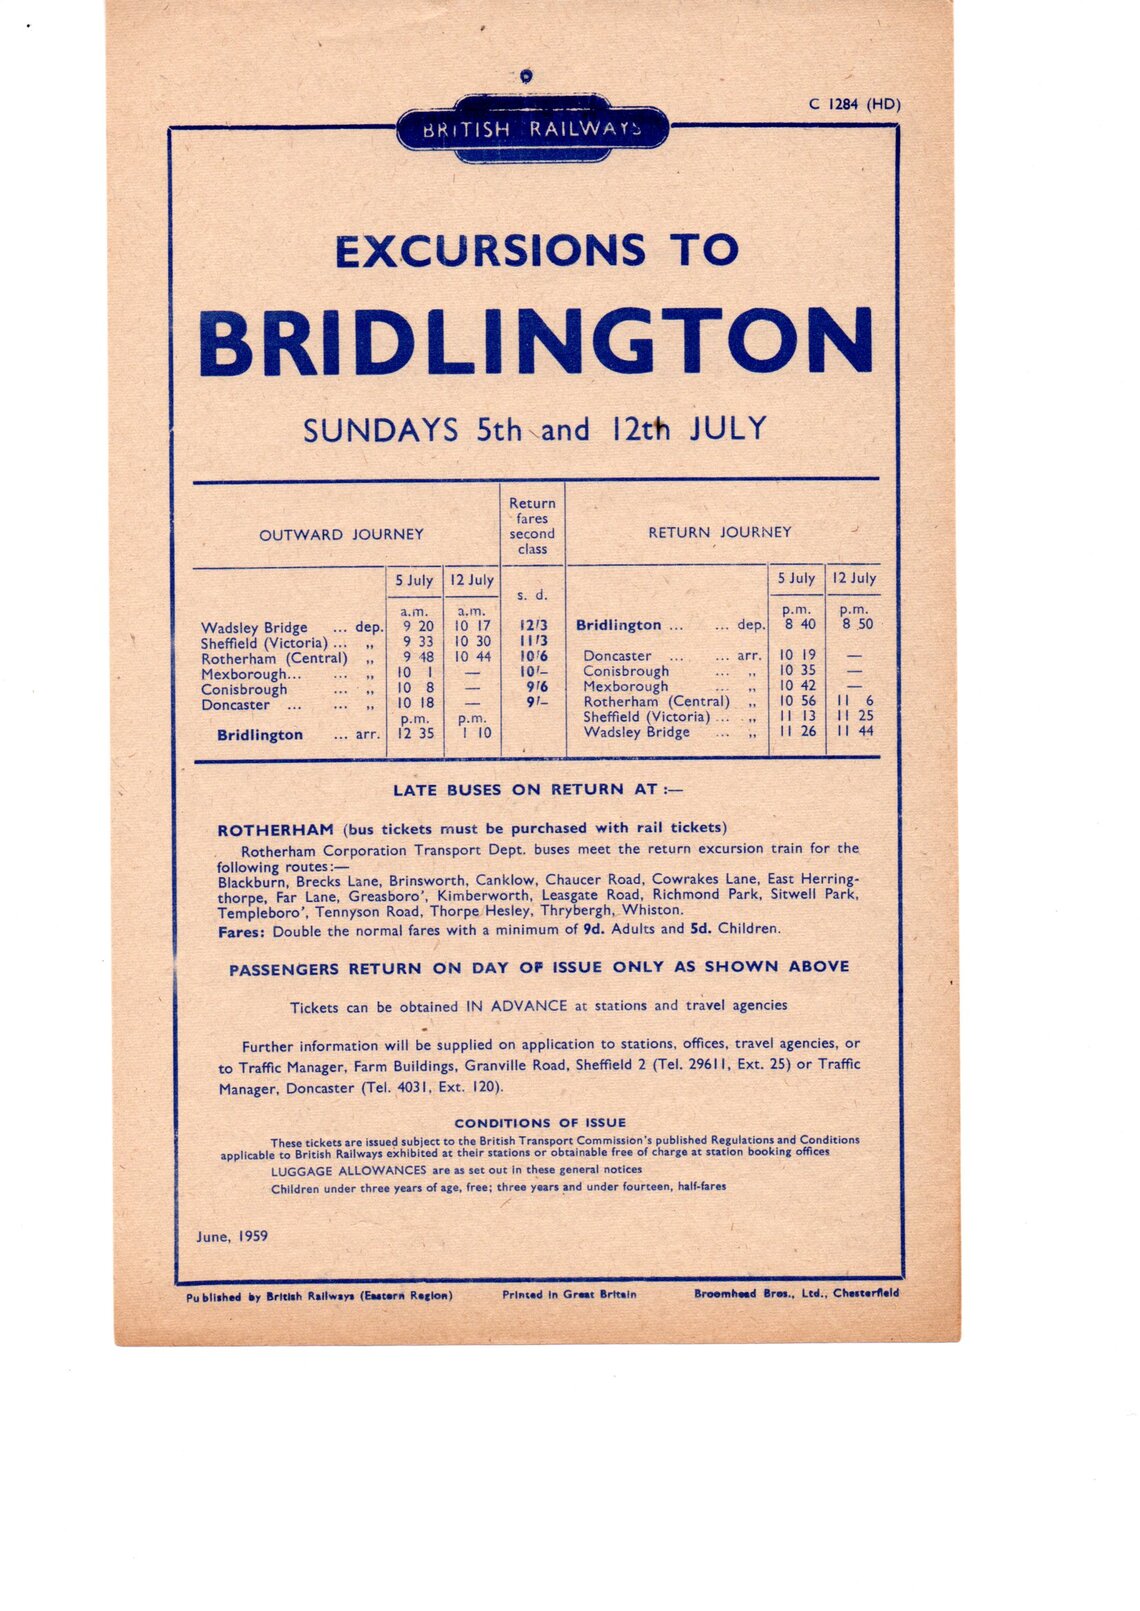 Excursion Trains to Bridlington Sundays in July 1959